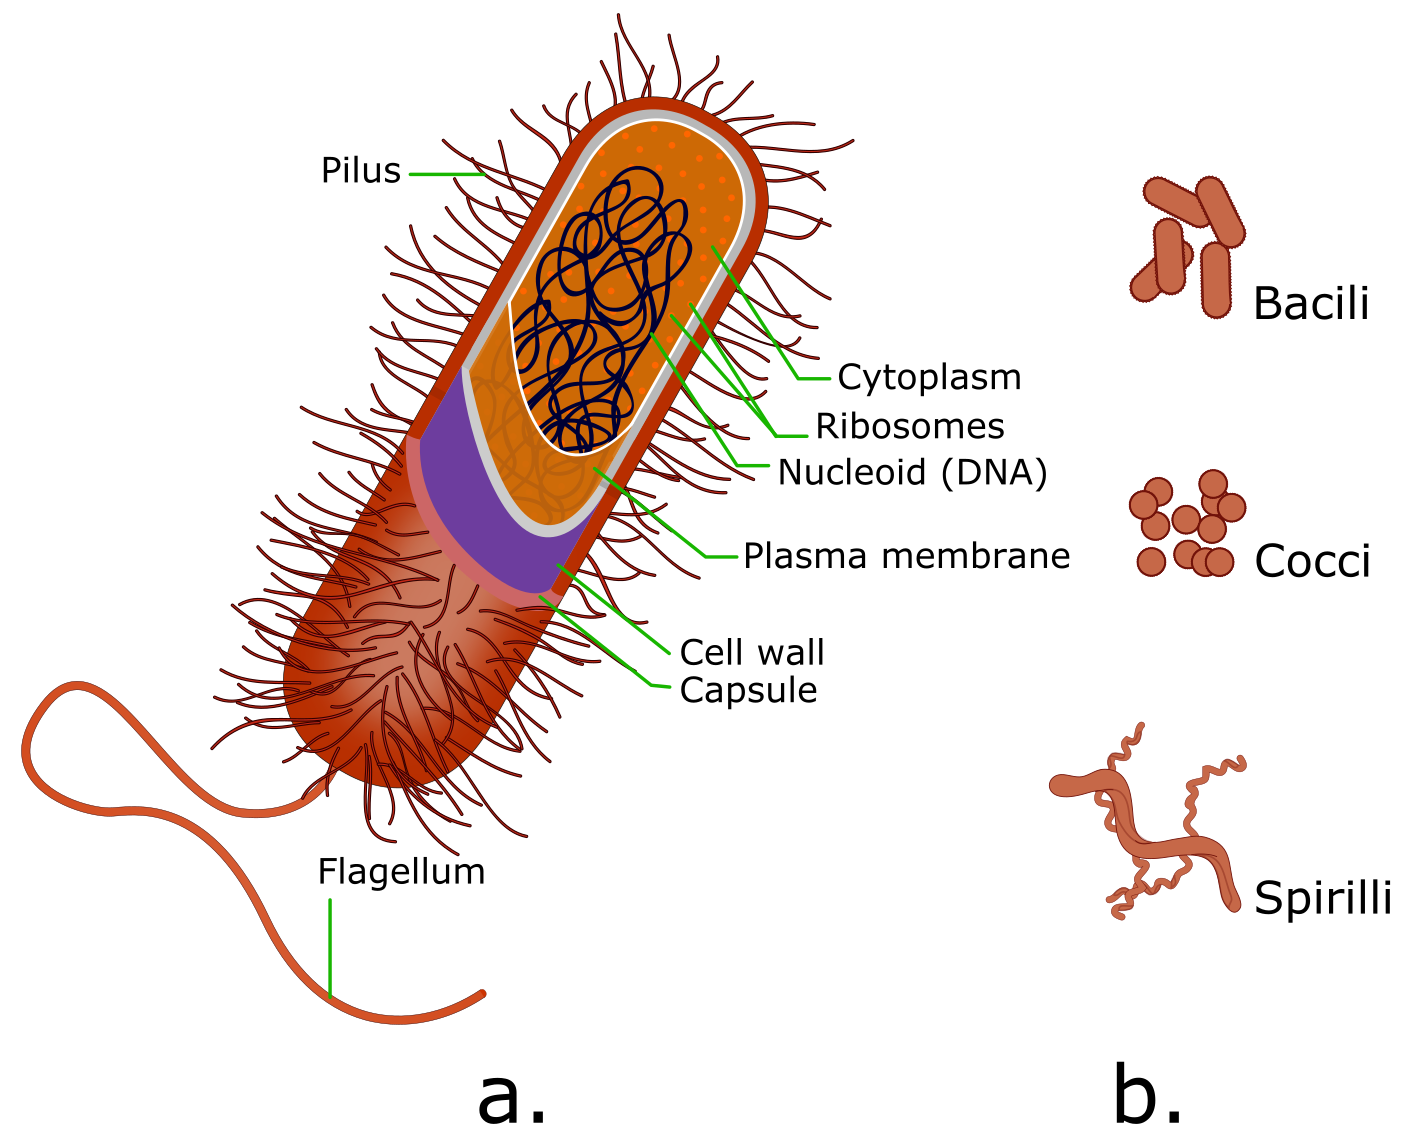 Image a shows a generalized prokaryotic cell. Image b shows 3 of the limited shapes that prokaryotes are found in.